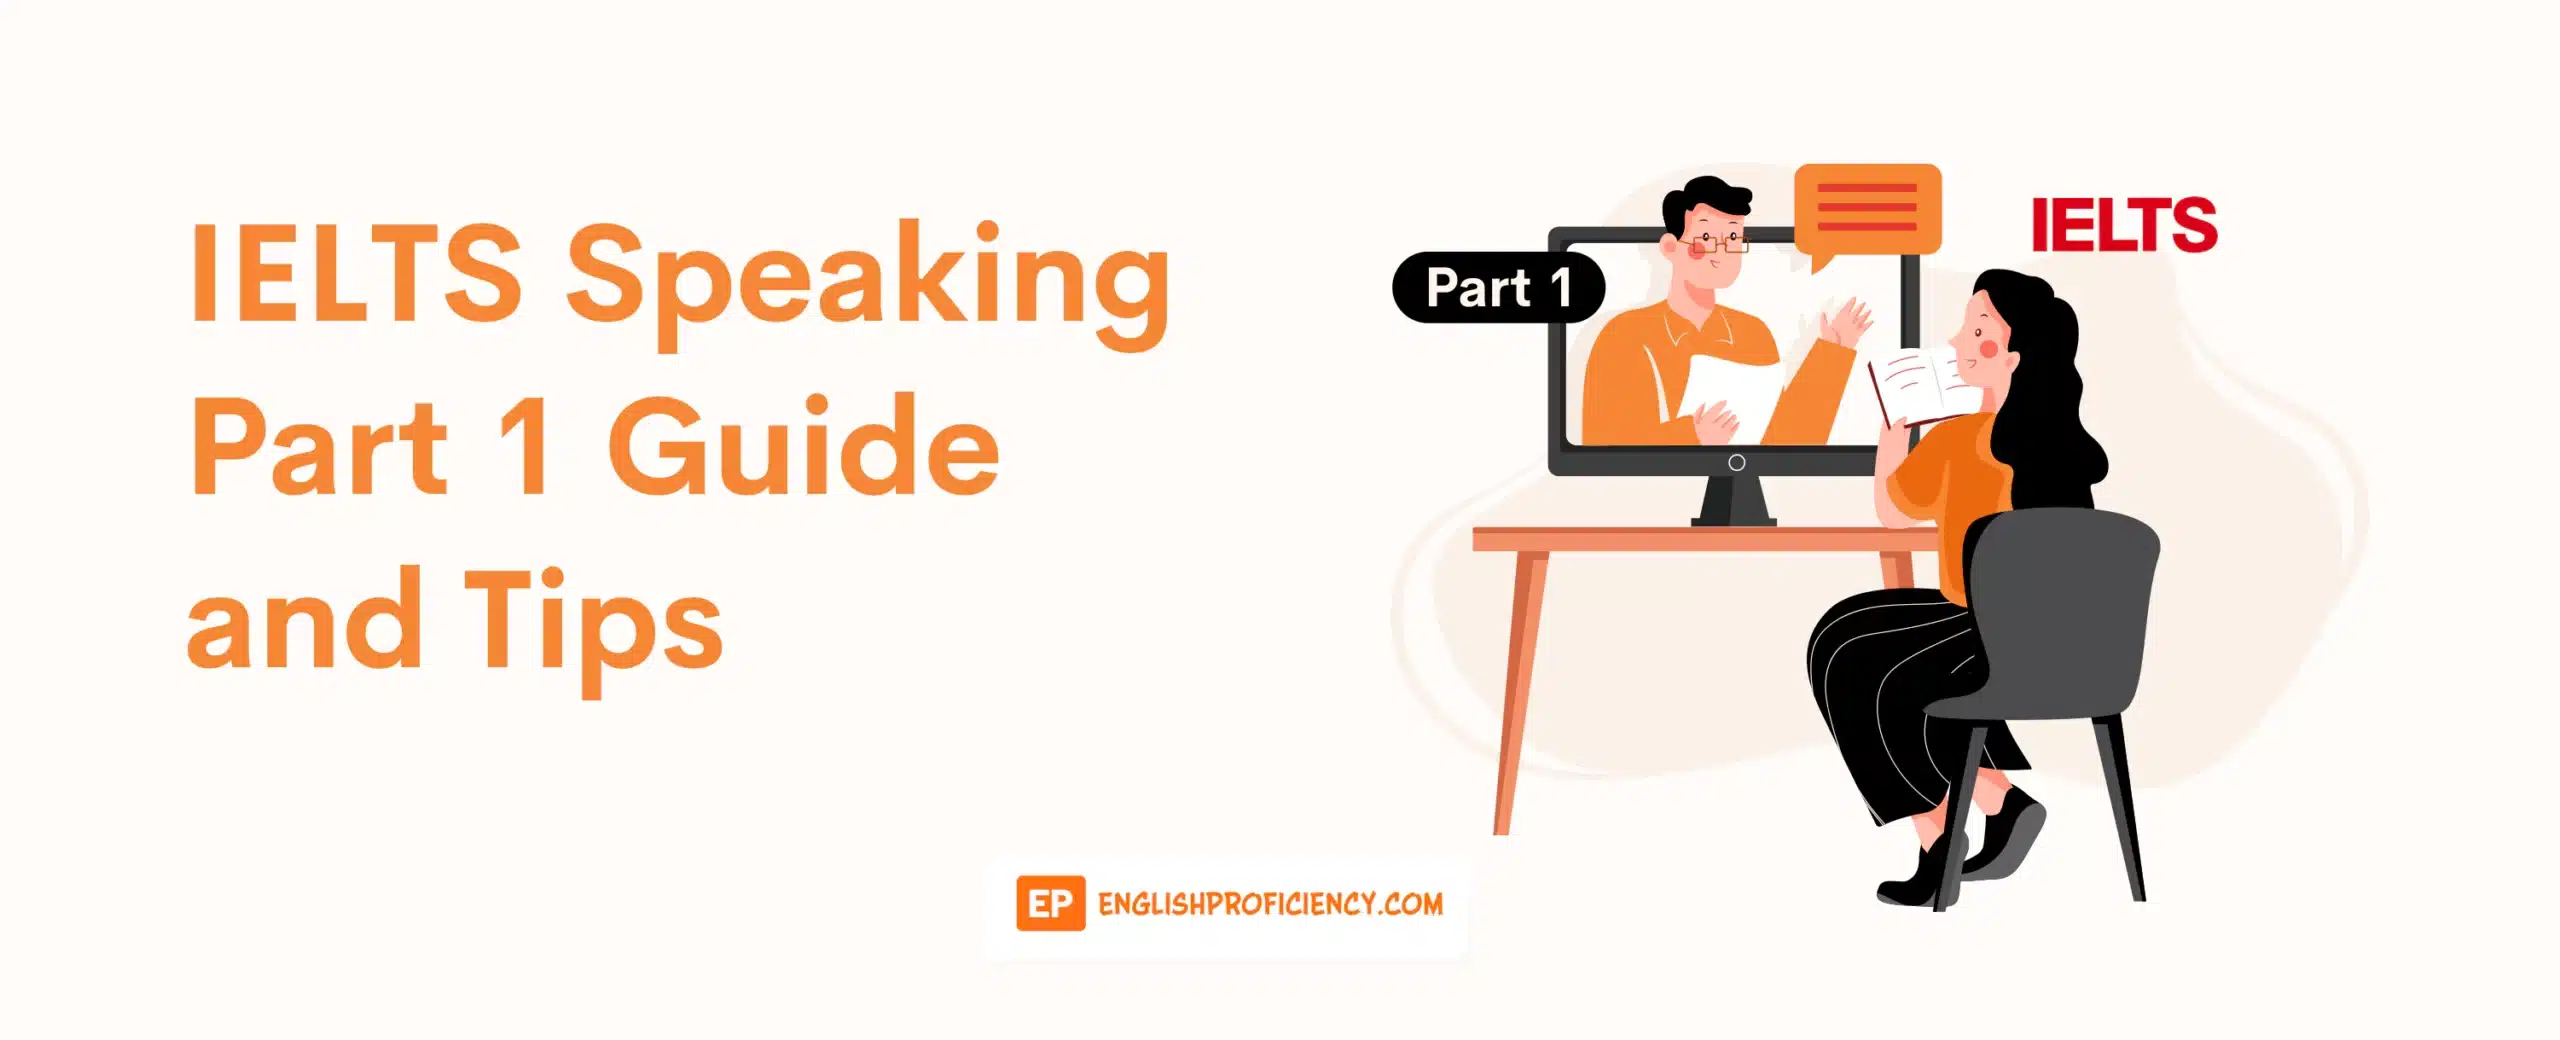 IELTS Speaking Part 1 Guide and Tips